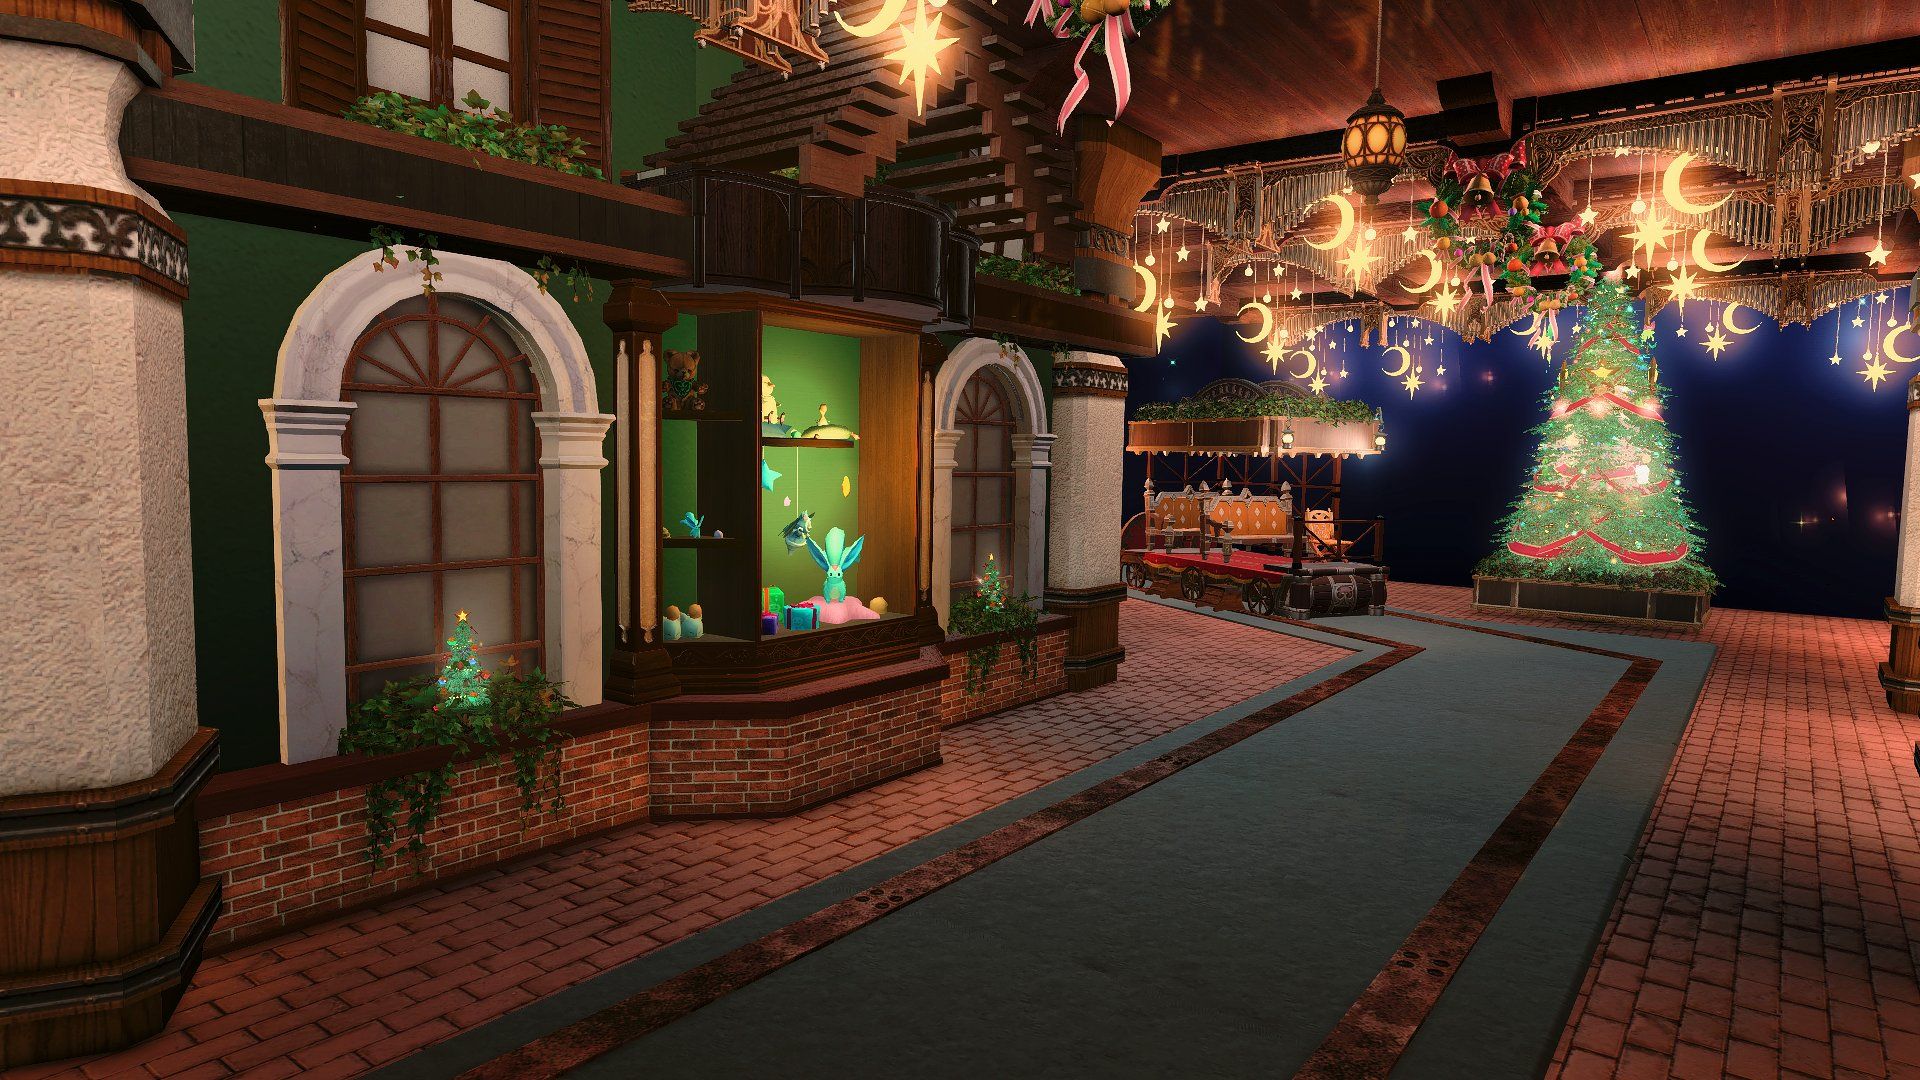 Maple Blackwell's Main Street USA Christmas build in FF14